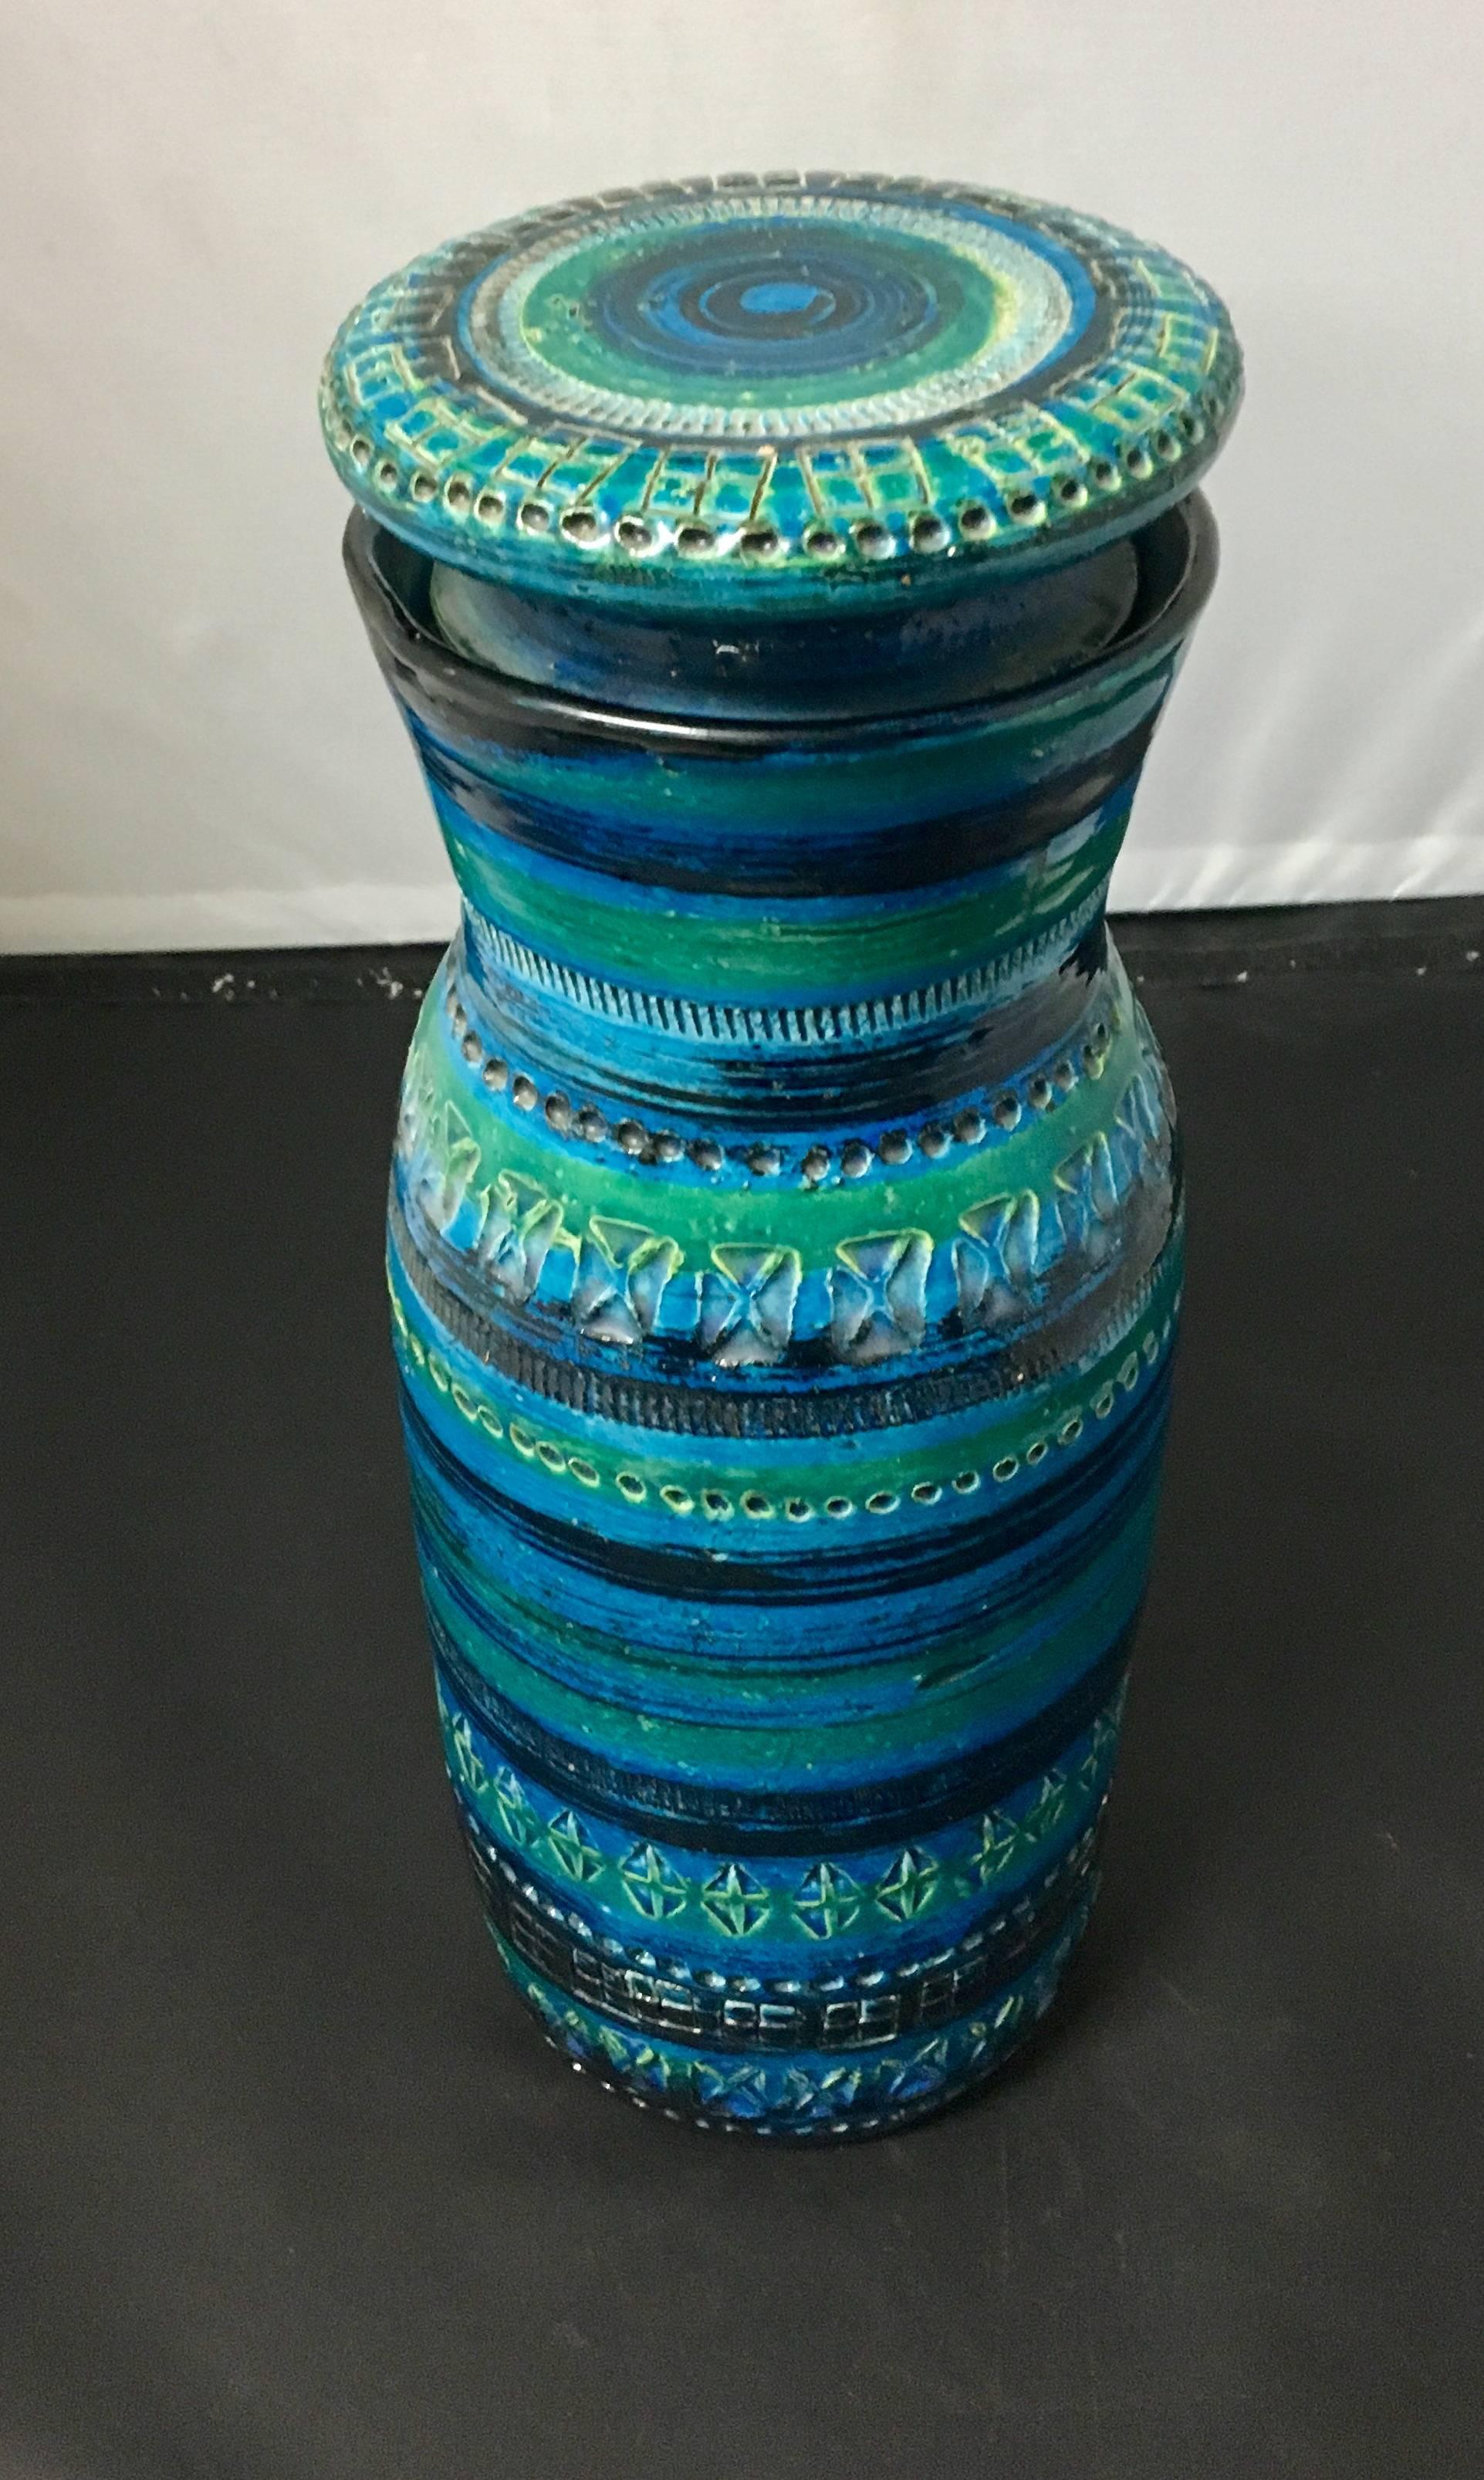 Beautiful tall lidded canister or jar designed by Aldo Londi for Bitossi. Vibrant "Rimini Blu aqua colored glaze; this piece has a great look and design. Made in Italy, signed and numbered.